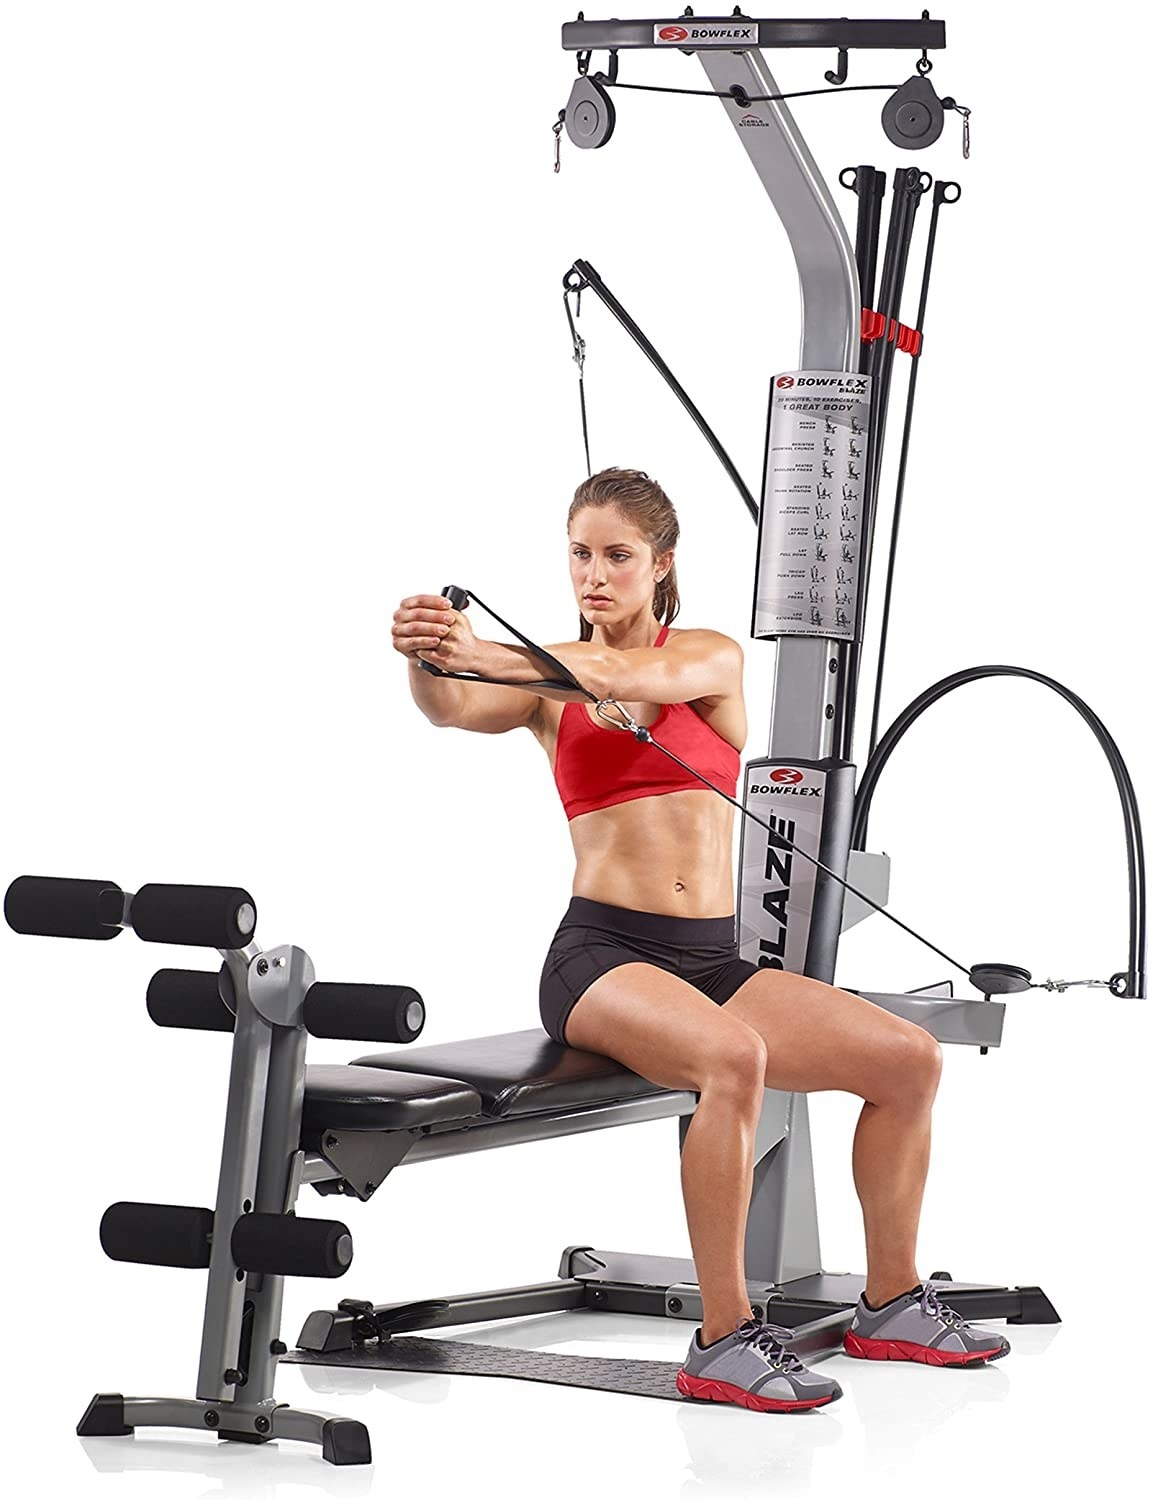 A person using the machine to do an arm pull while sitting on the bench